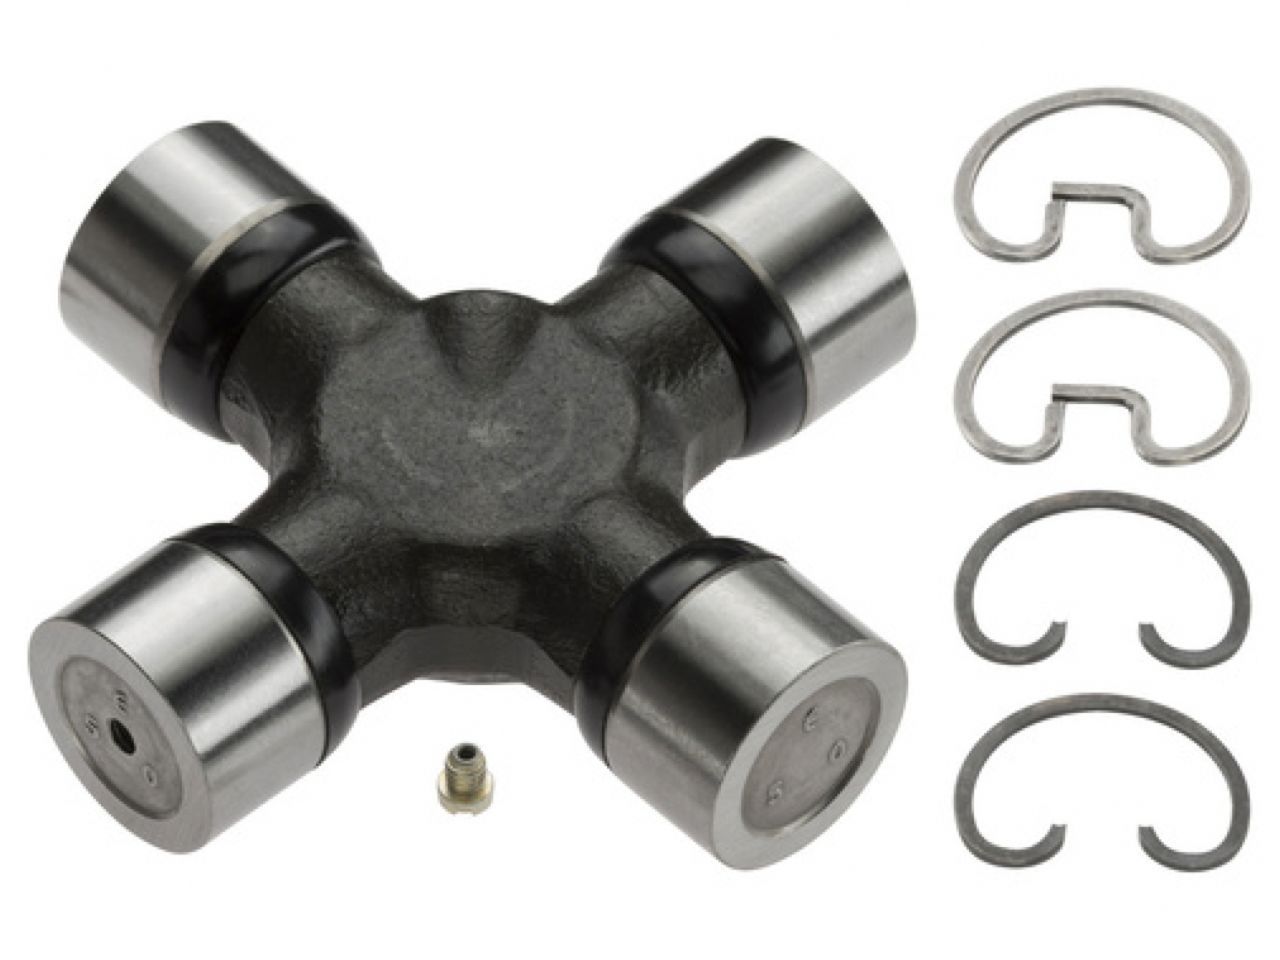 Moog 295 Universal Joint Super Strength 1410 Style Greasable Steel Each